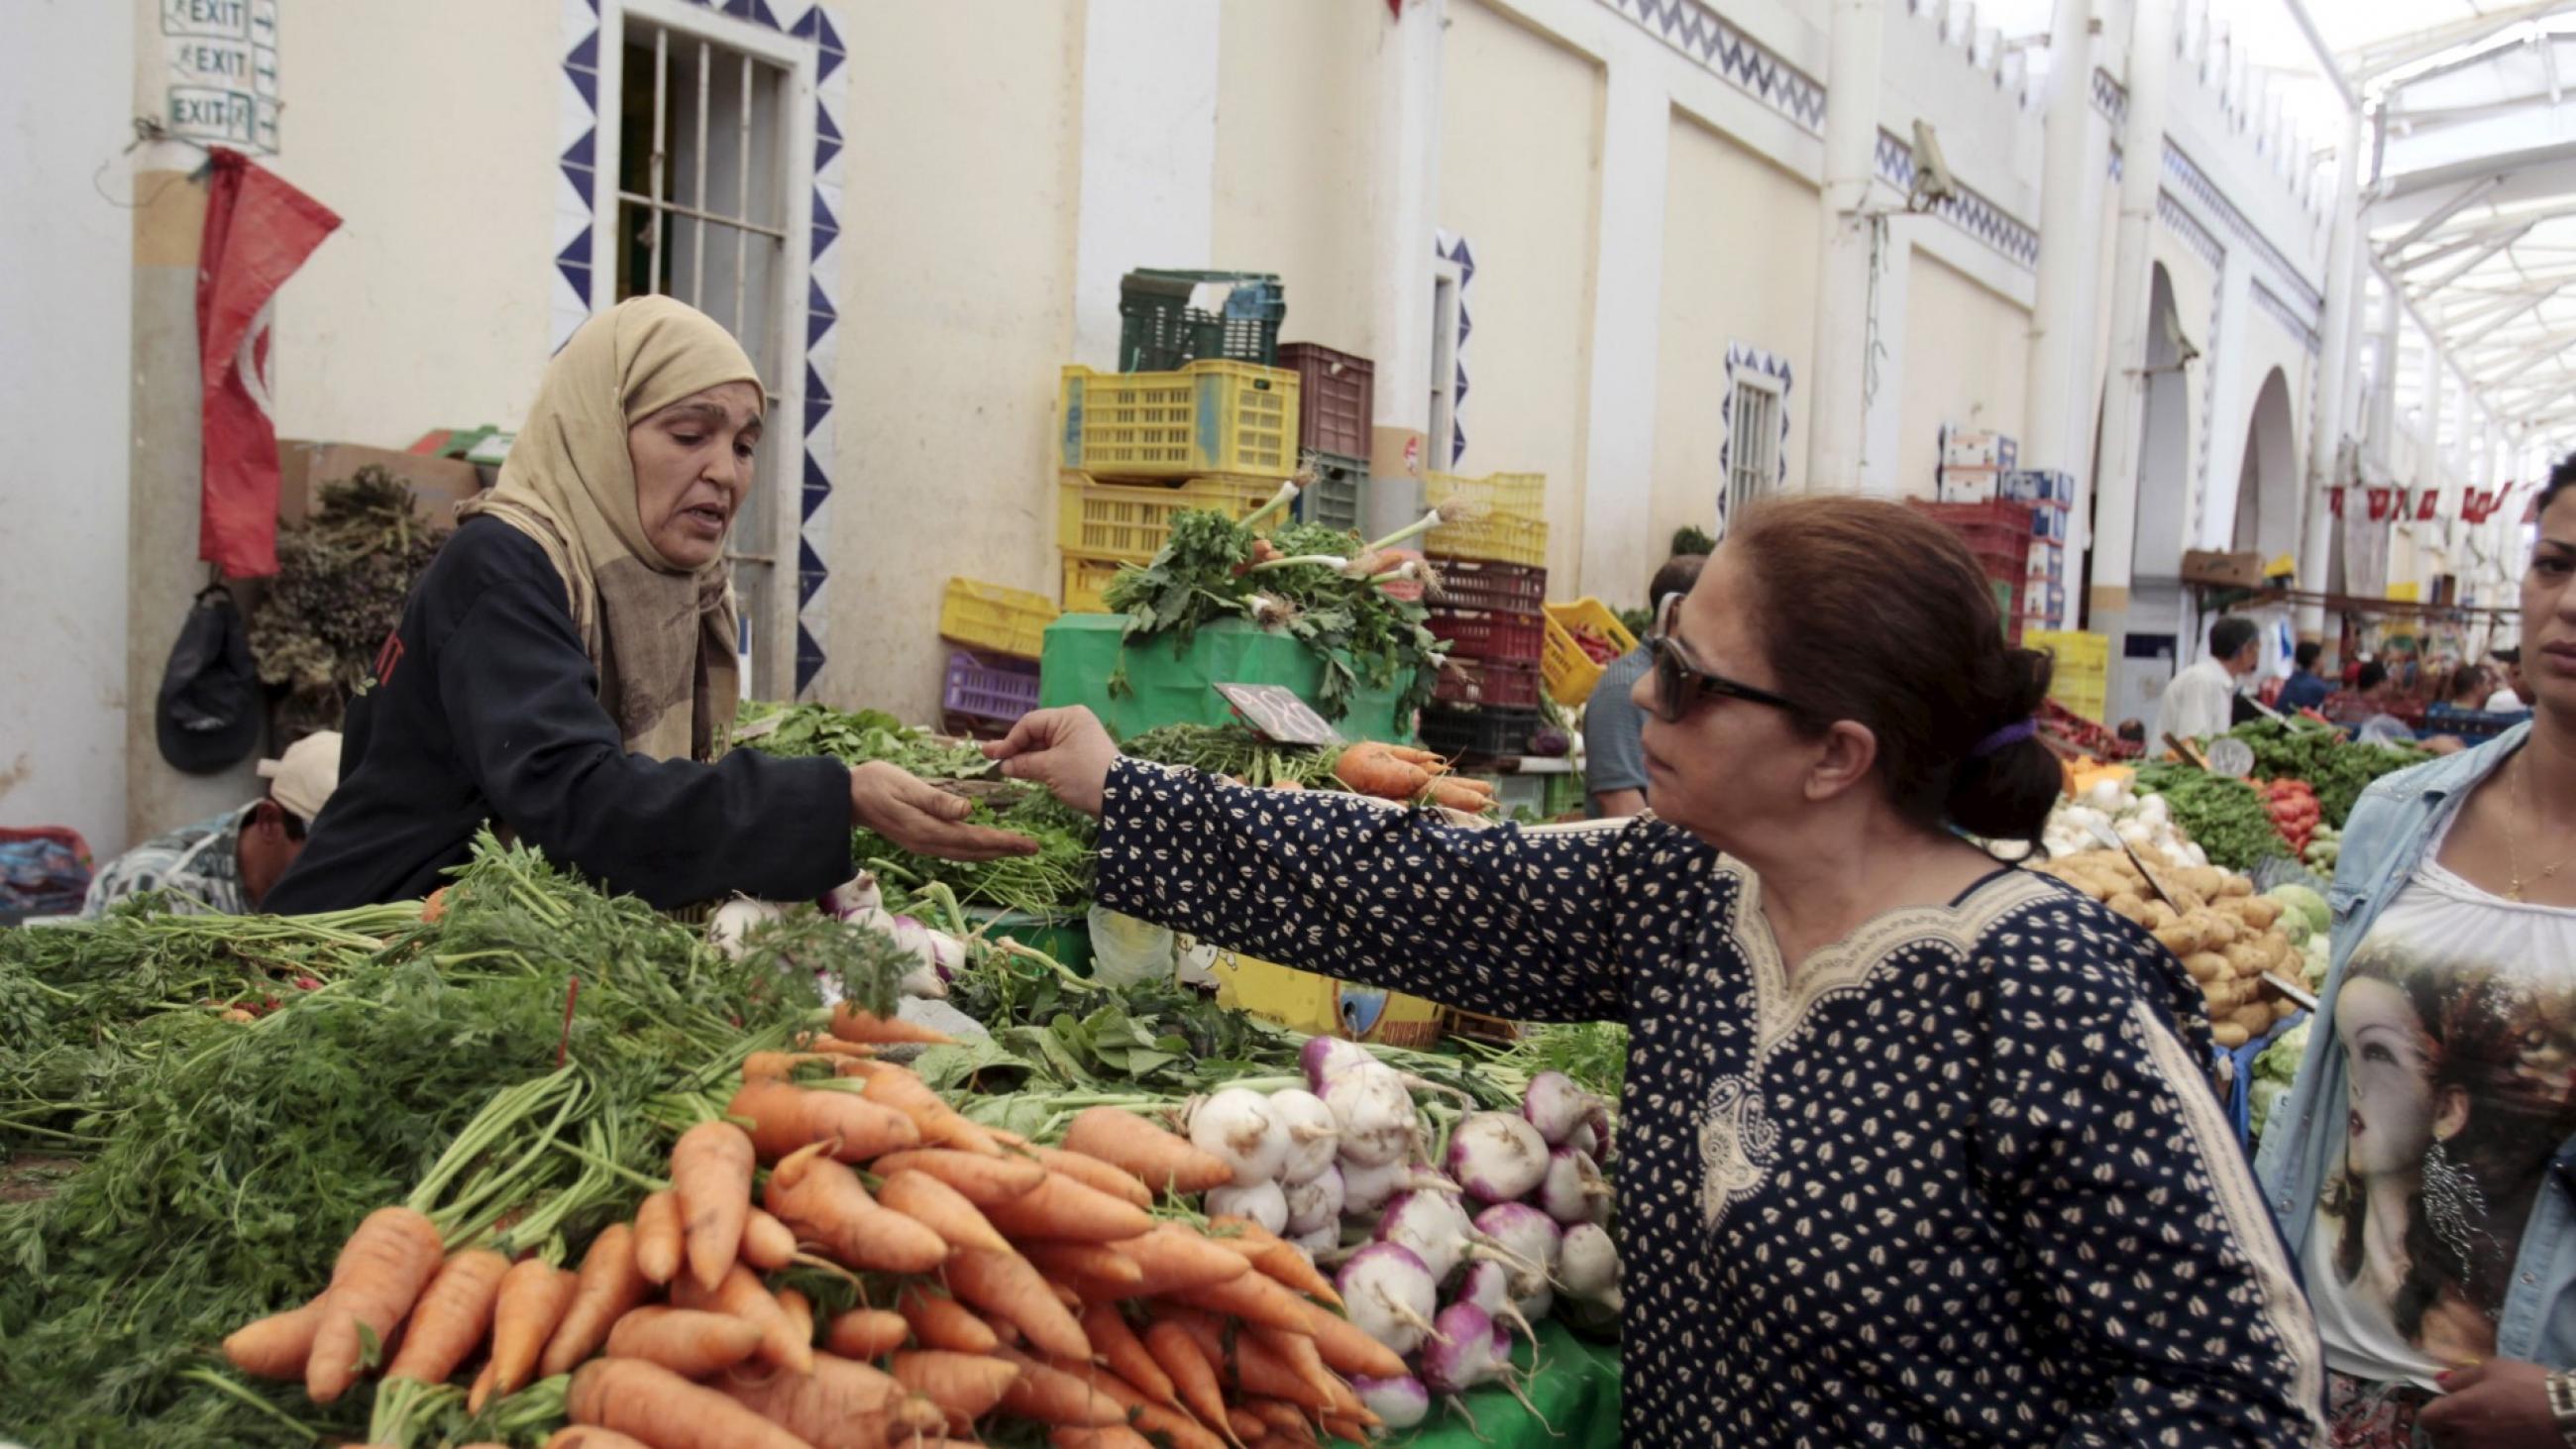 A woman buys vegetables from a vendor on the first day of Ramadan, the Muslim holy fasting month, in a market downtown in Tunis,Tunisia, on June 18, 2015. 